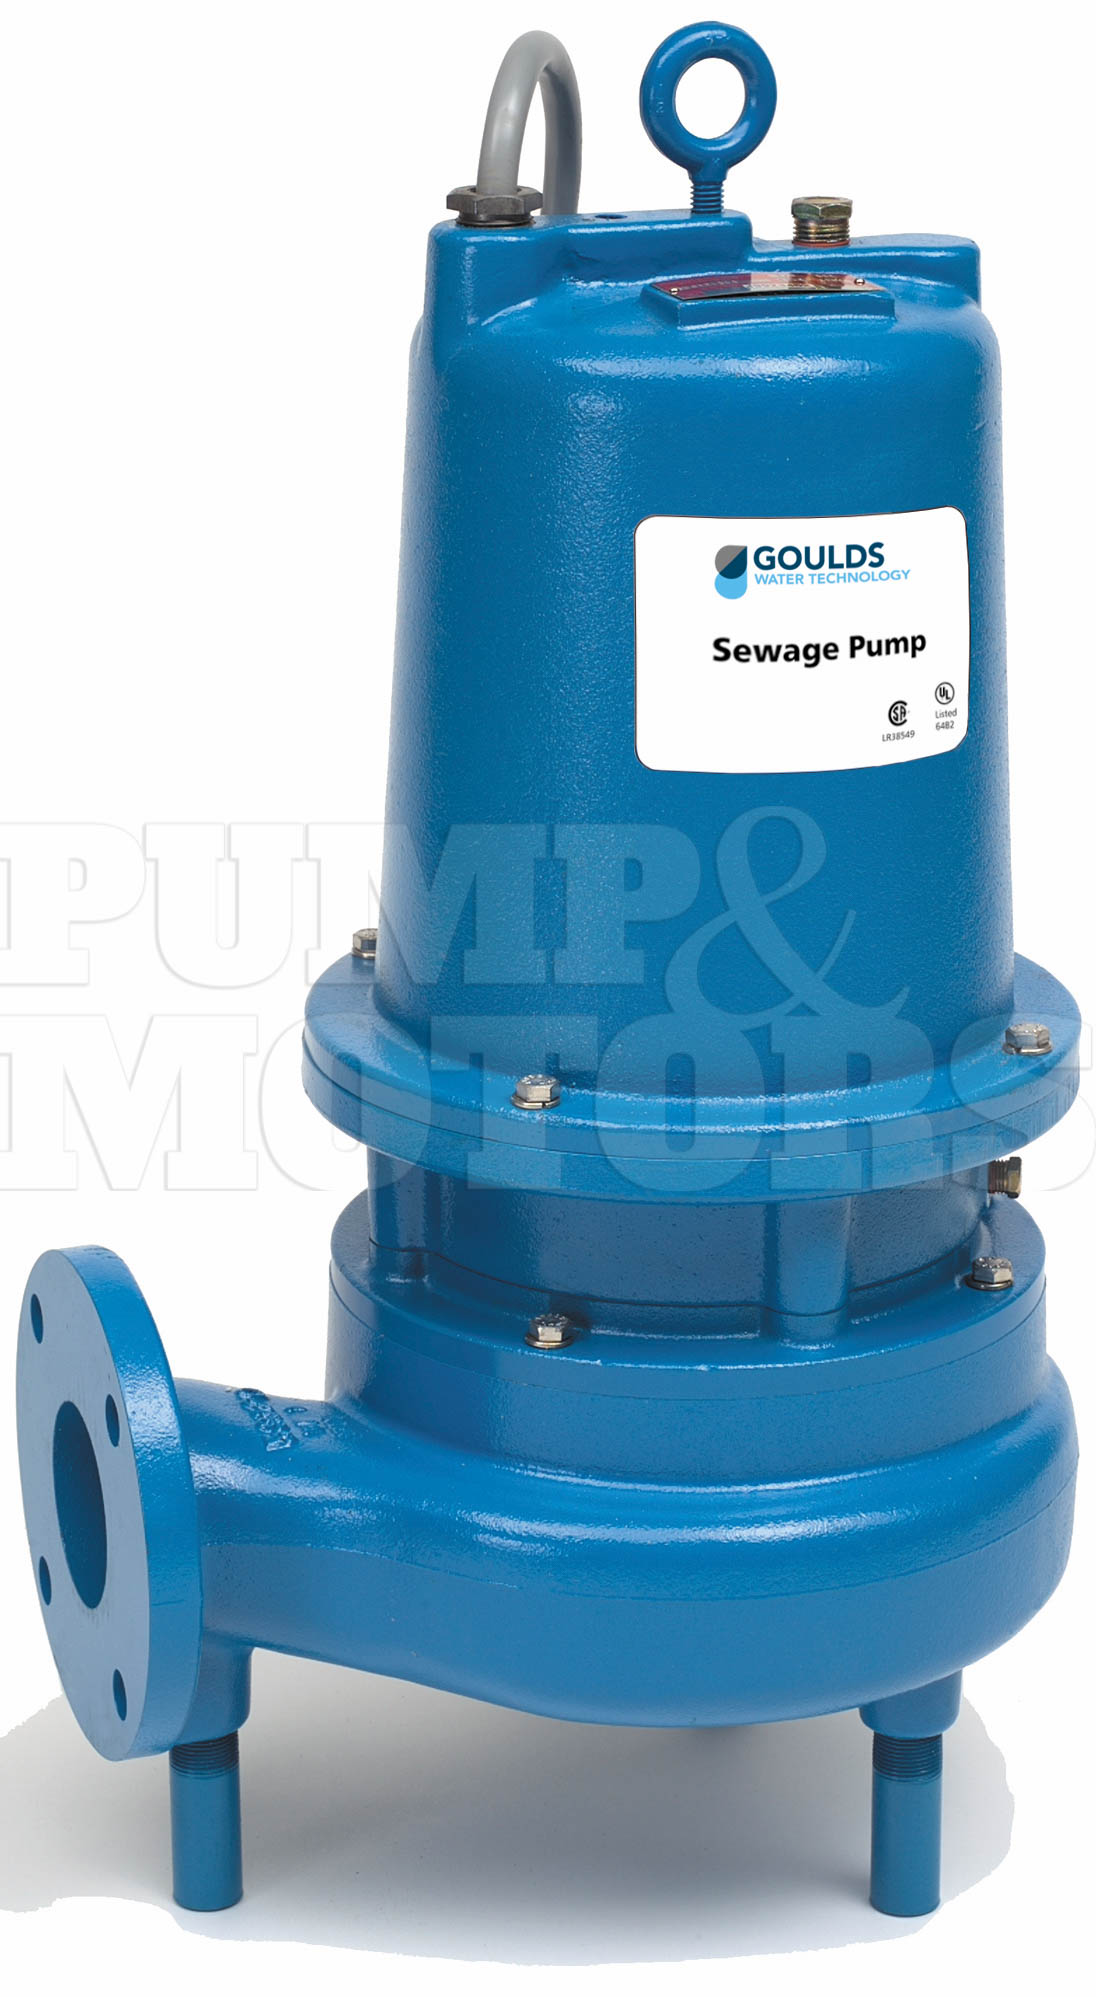 Goulds 3SD52F4EA 1.5HP Submersible Sewage Pump 460V Three Phase